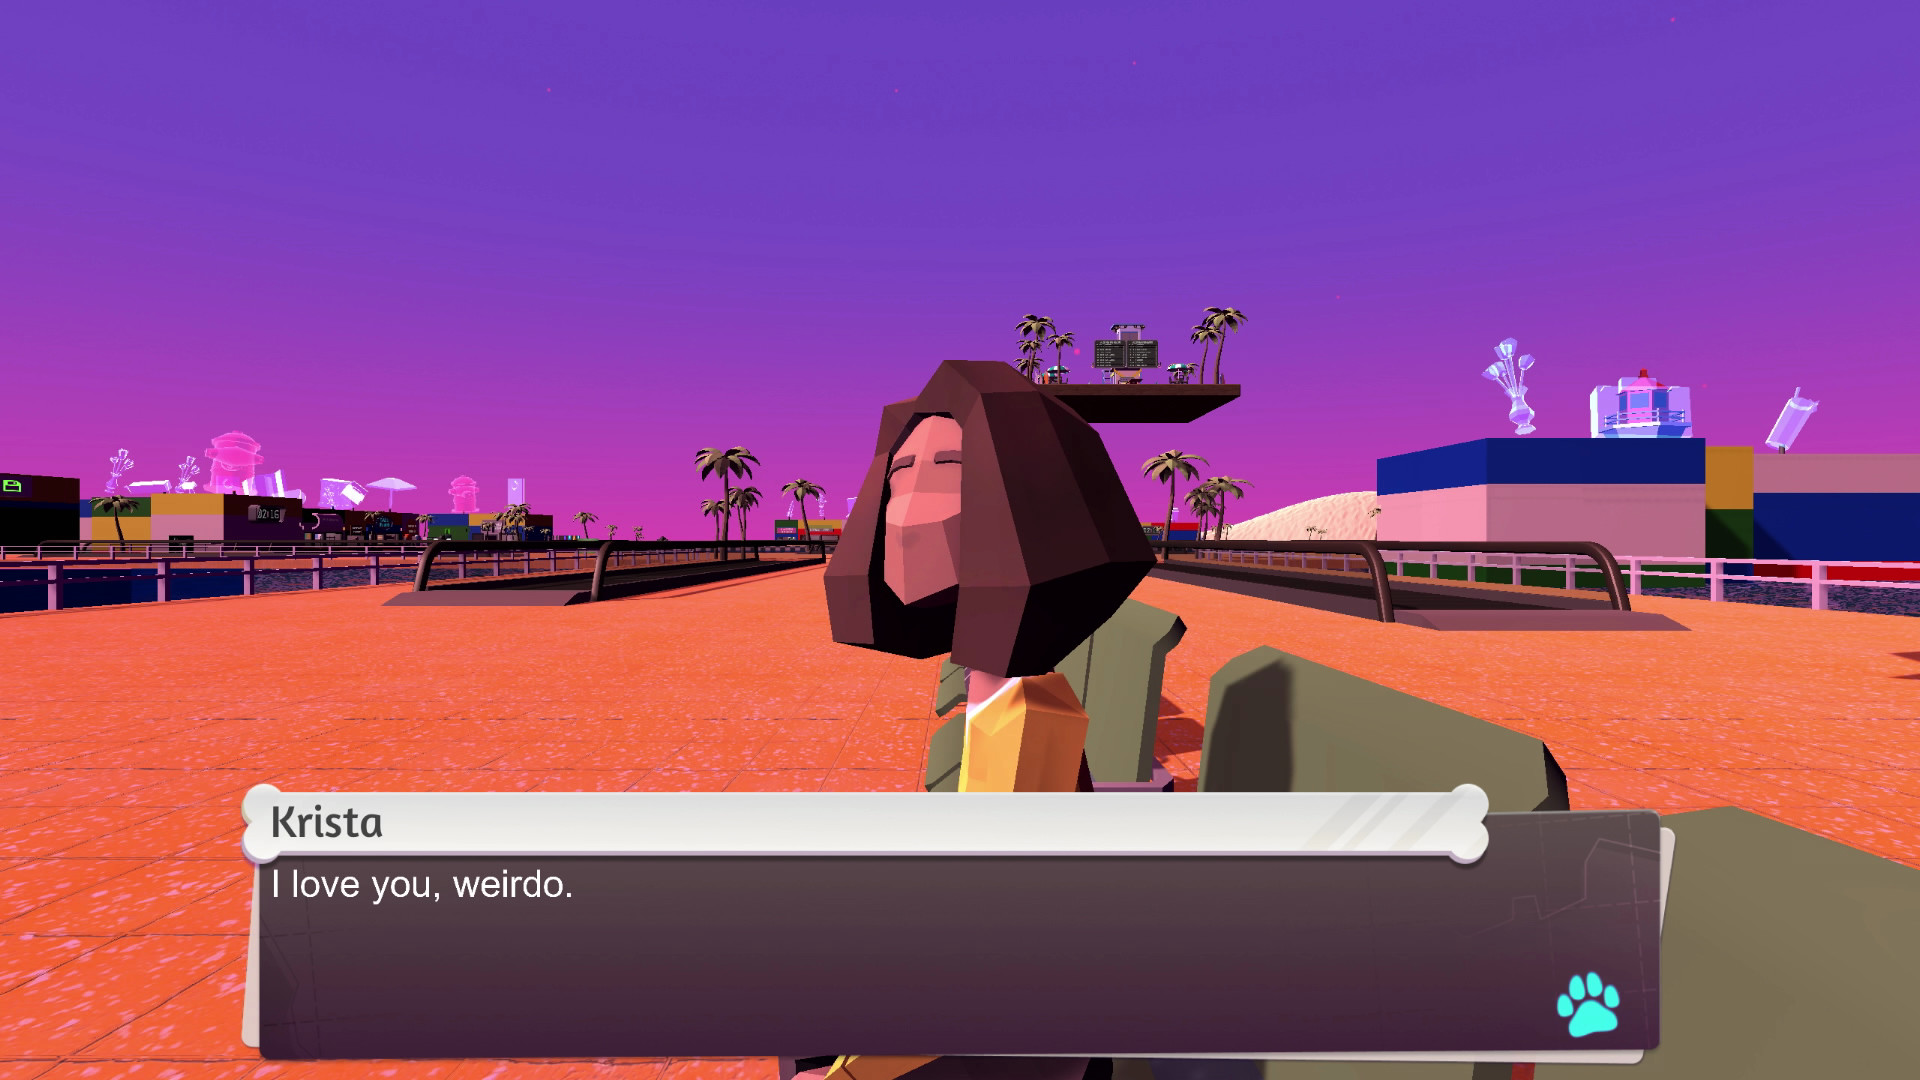 The player character's fiance, Krista, saying "I love you, weirdo"